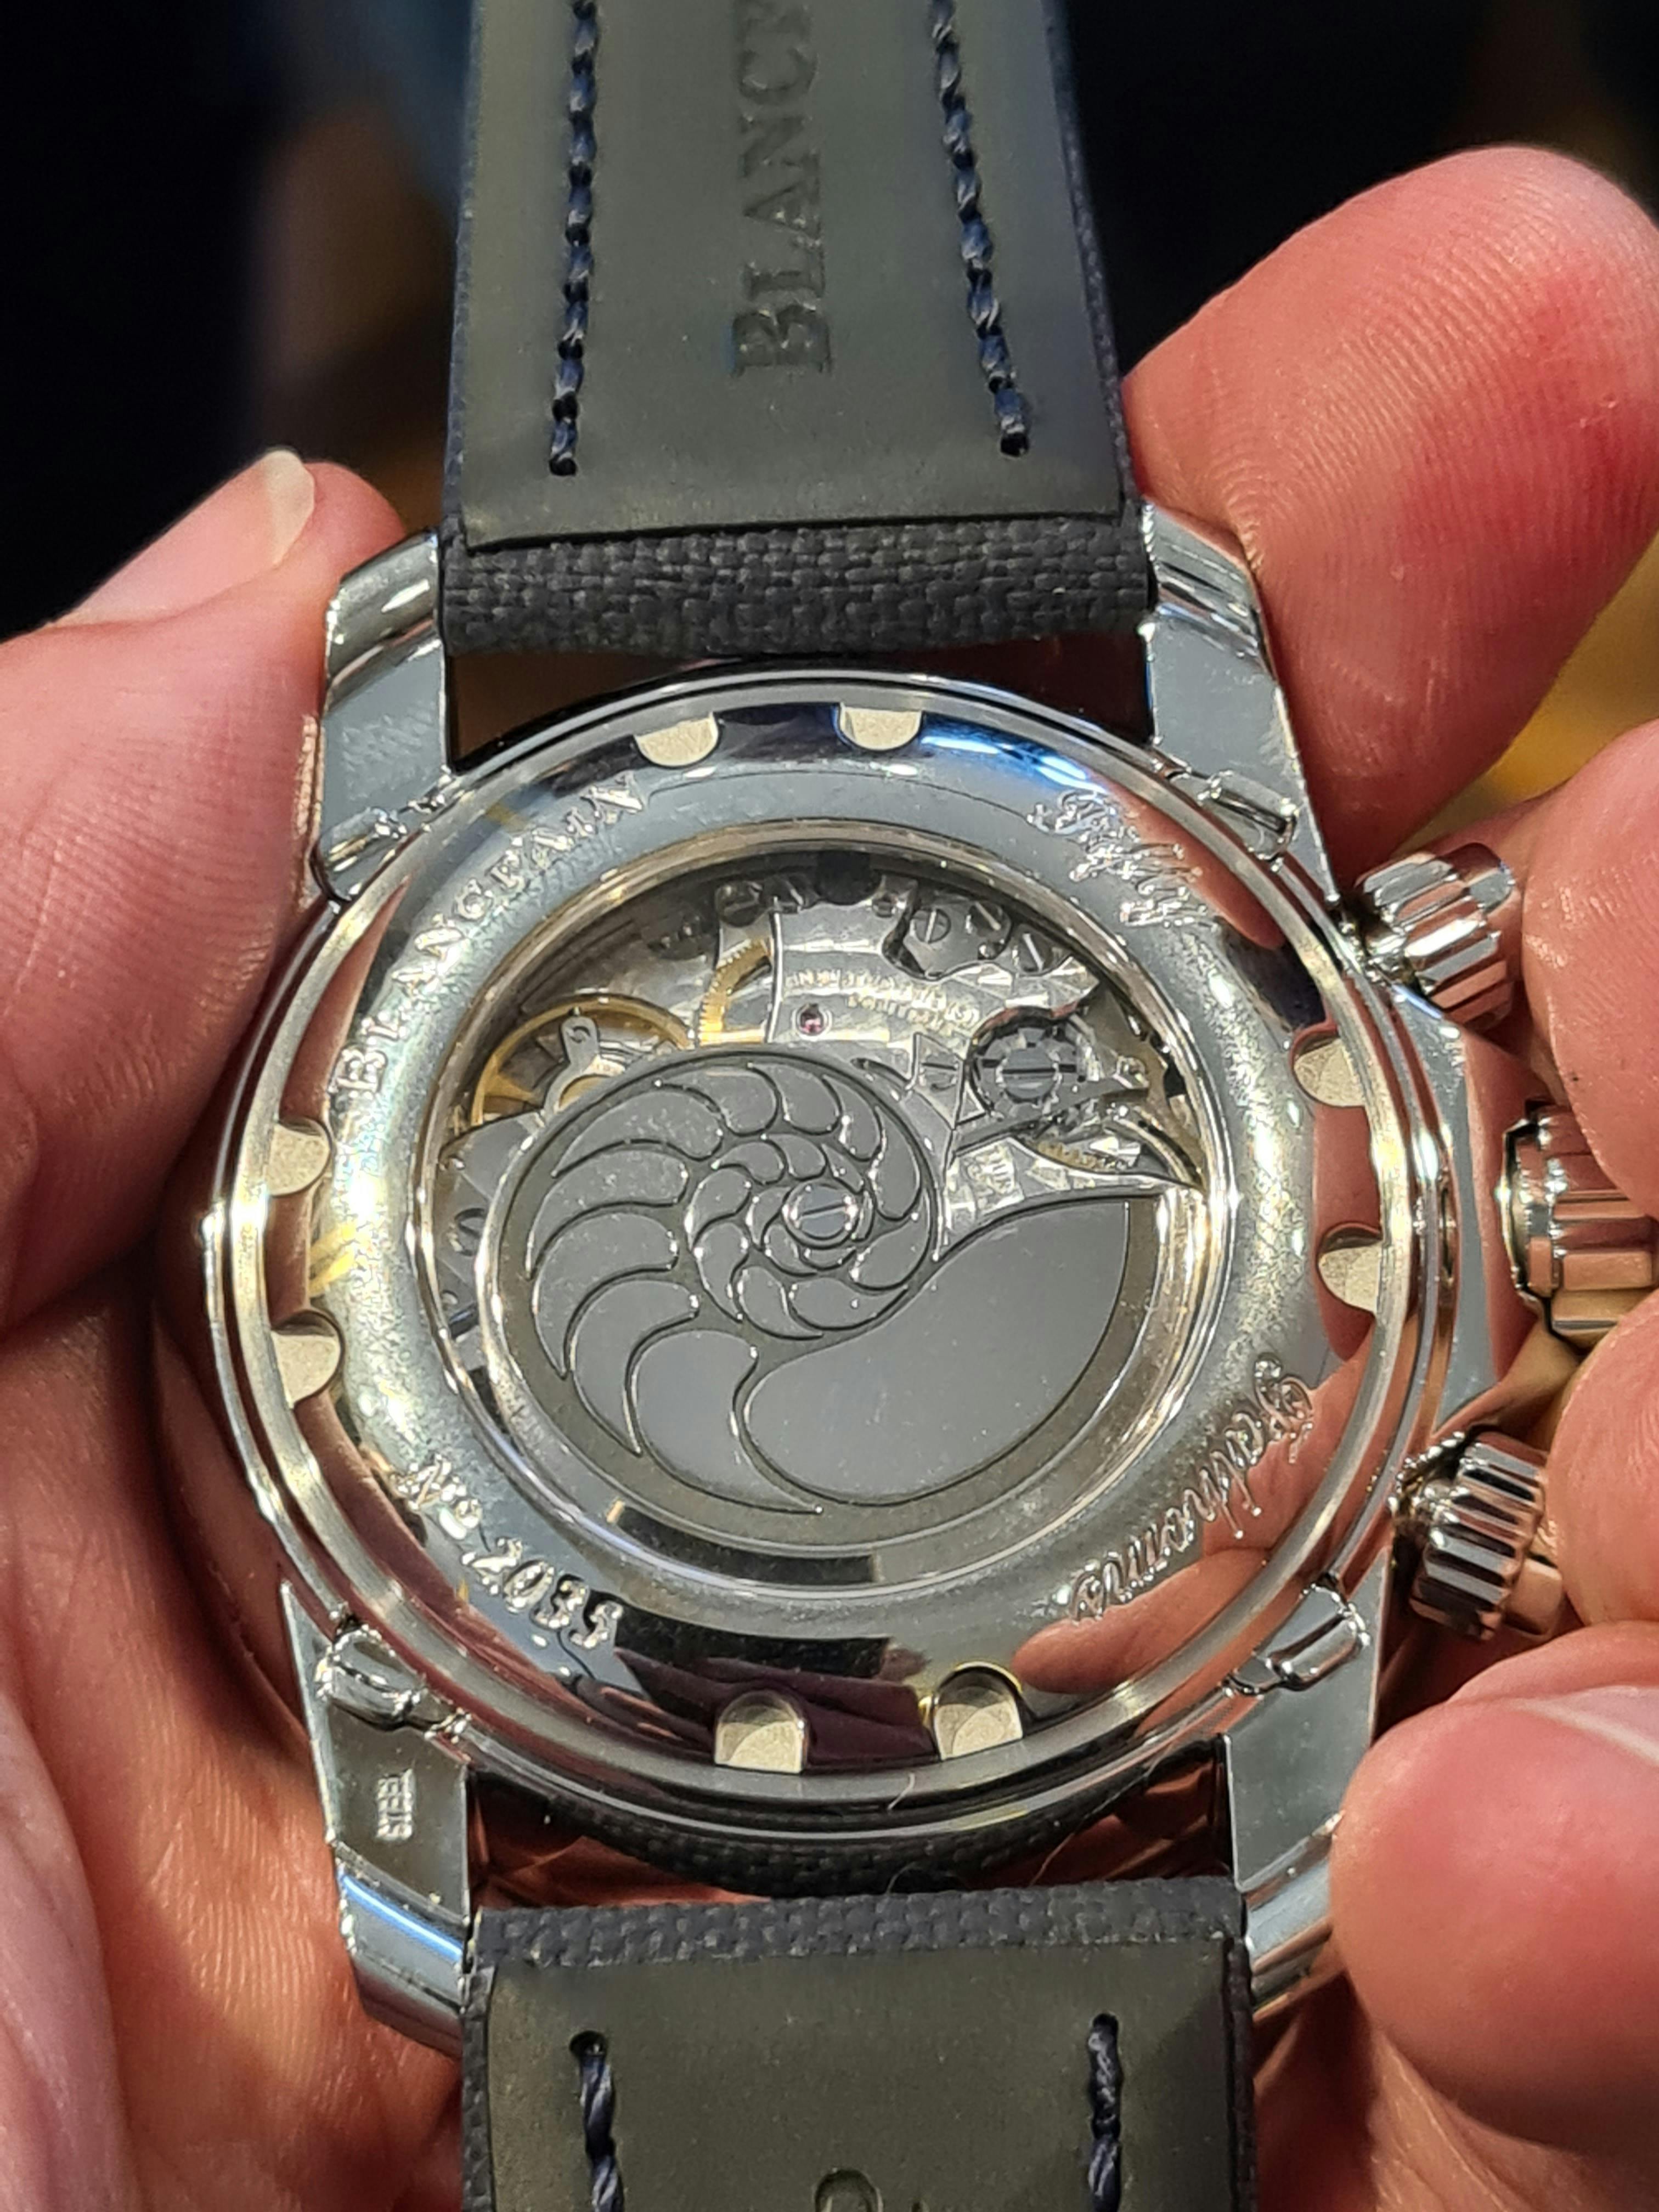 Blancpain Fifty Fathoms watch with a Seashell Rotor and highly finished movement.